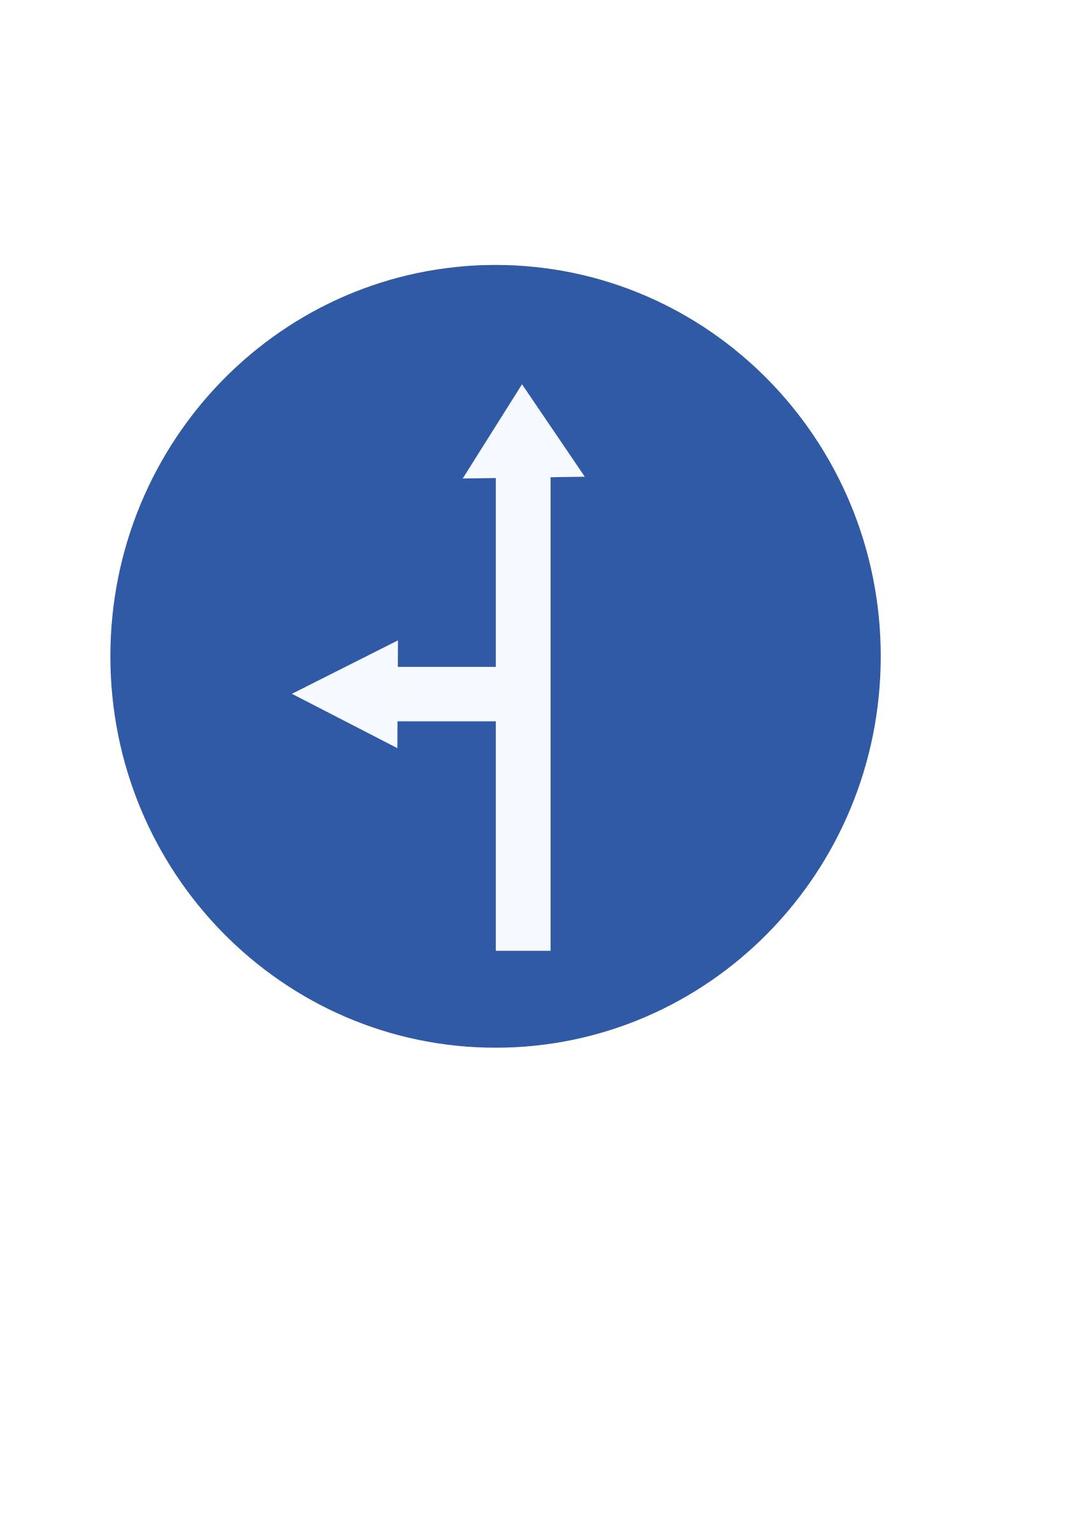 Indian road sign - Ahead or turn left png transparent